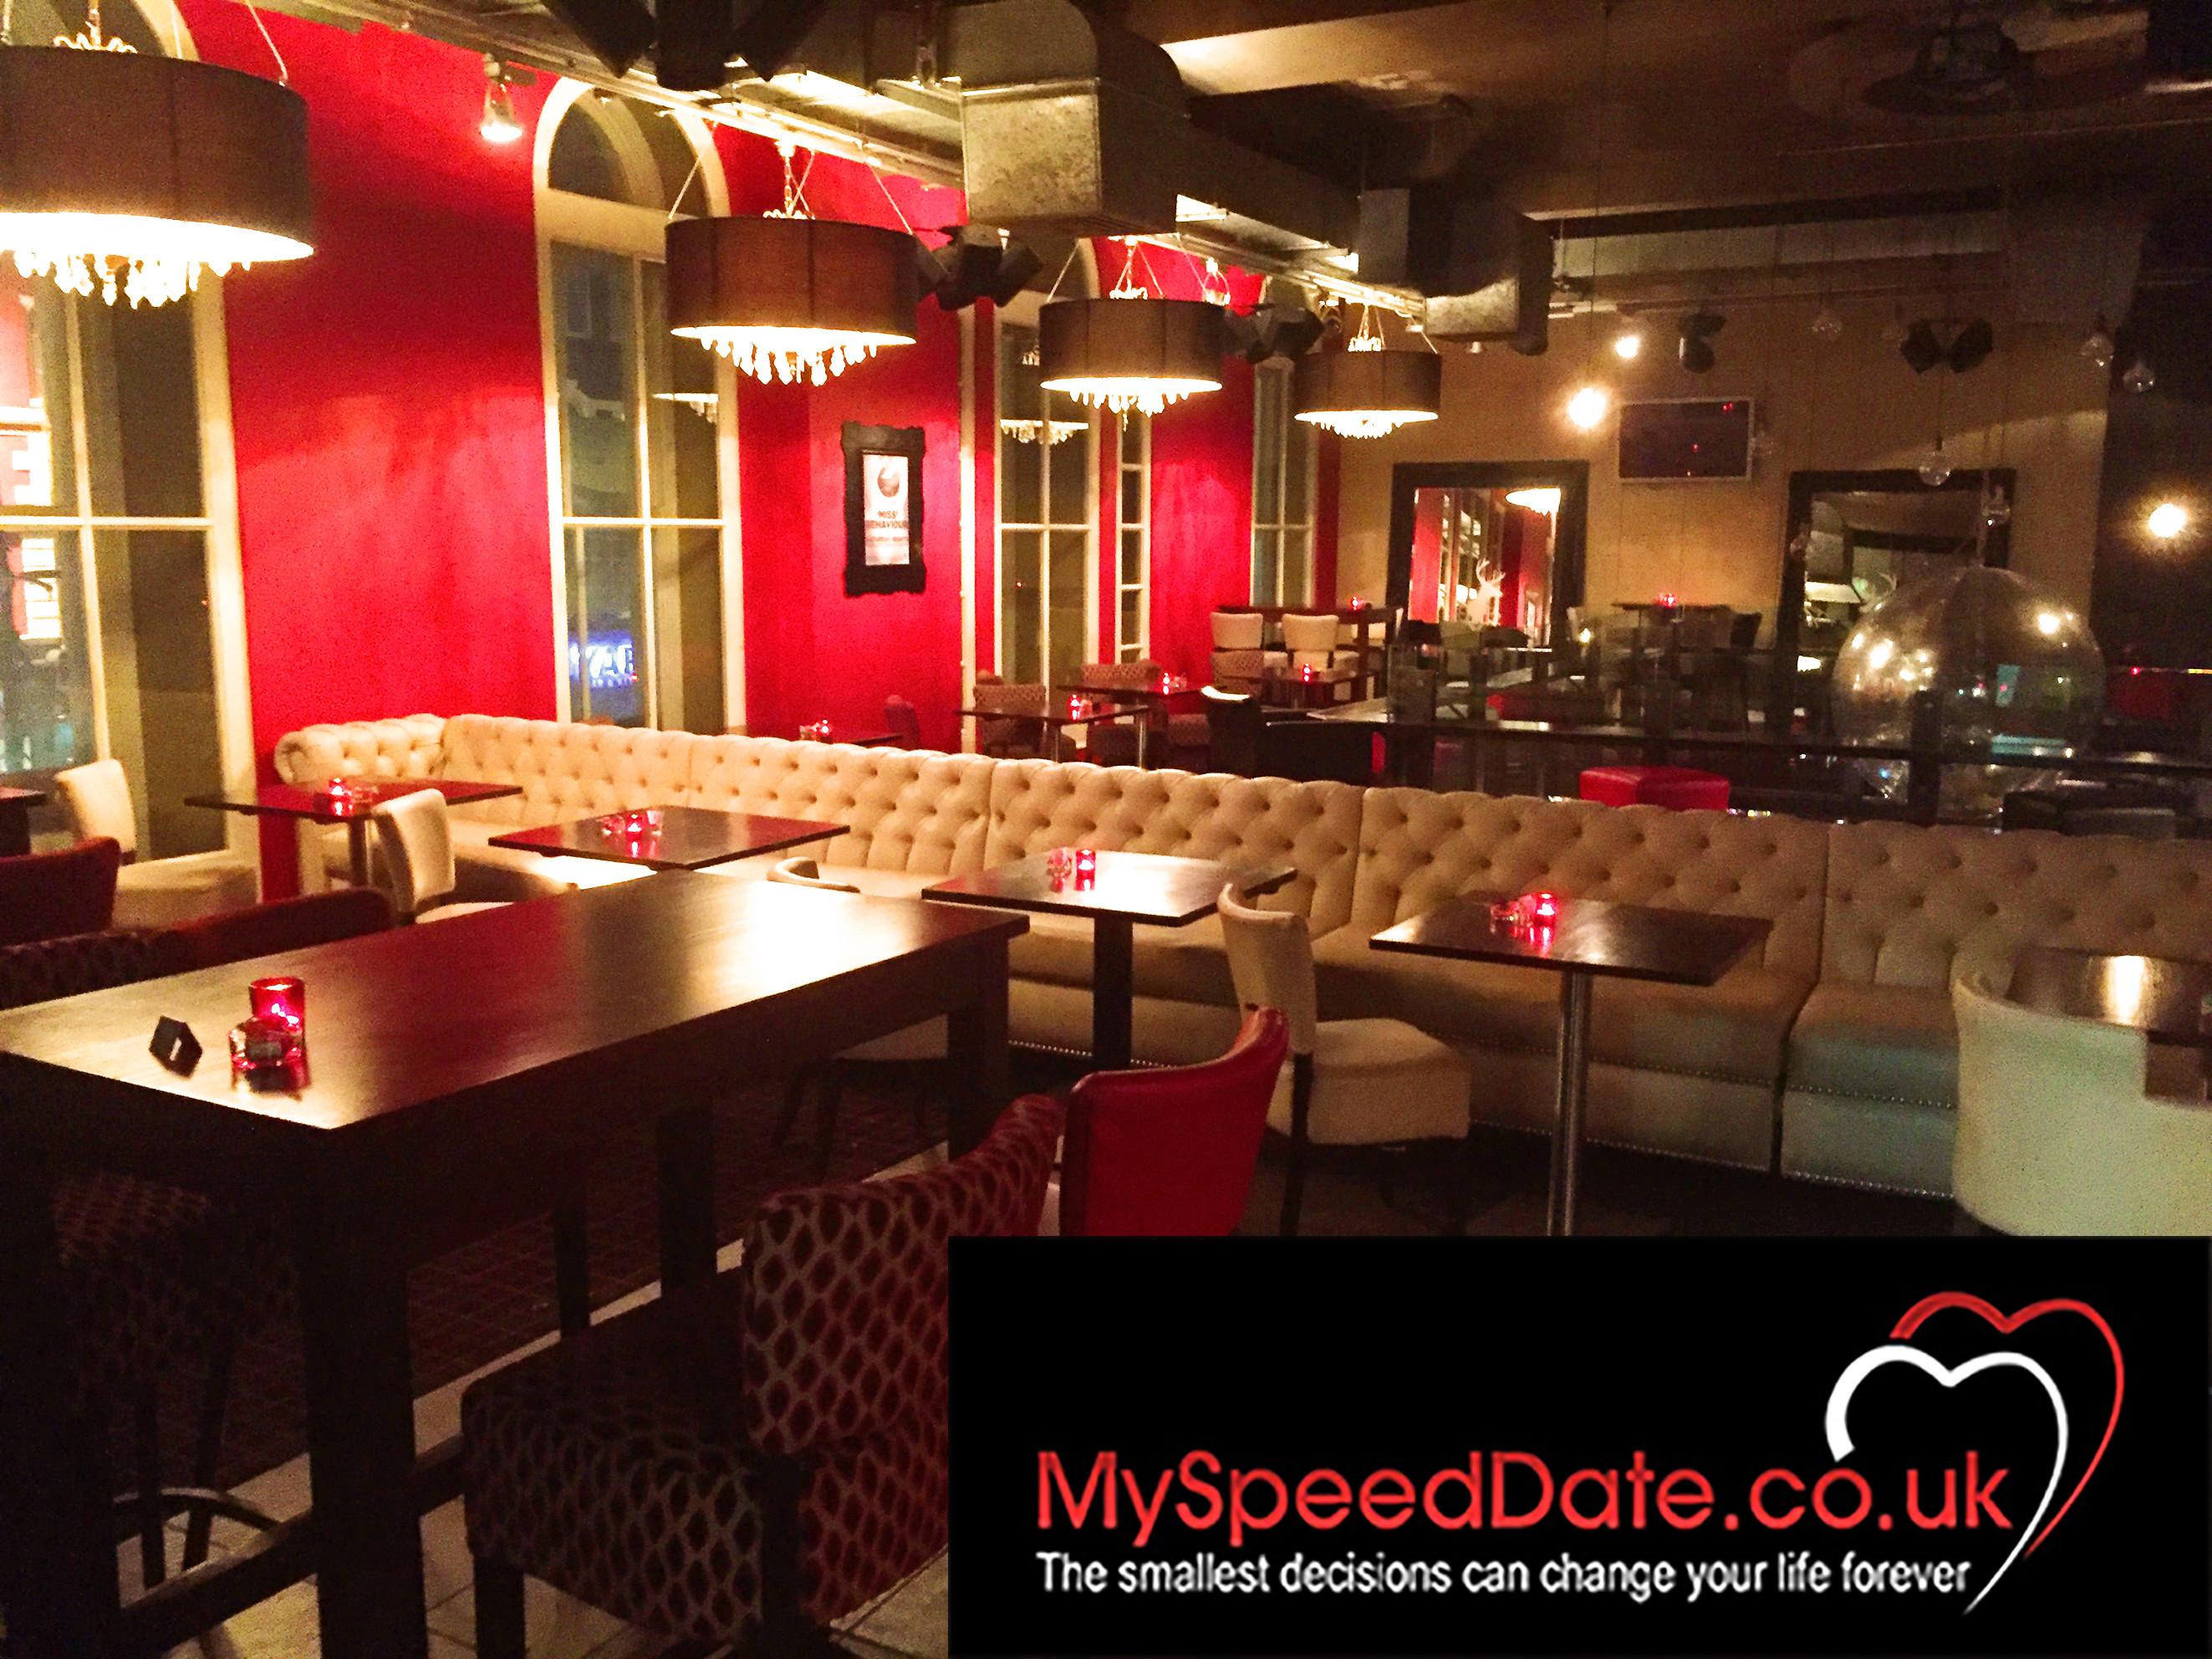 Speed Dating: at Slug and Lettuce, Cardiff on 15th July